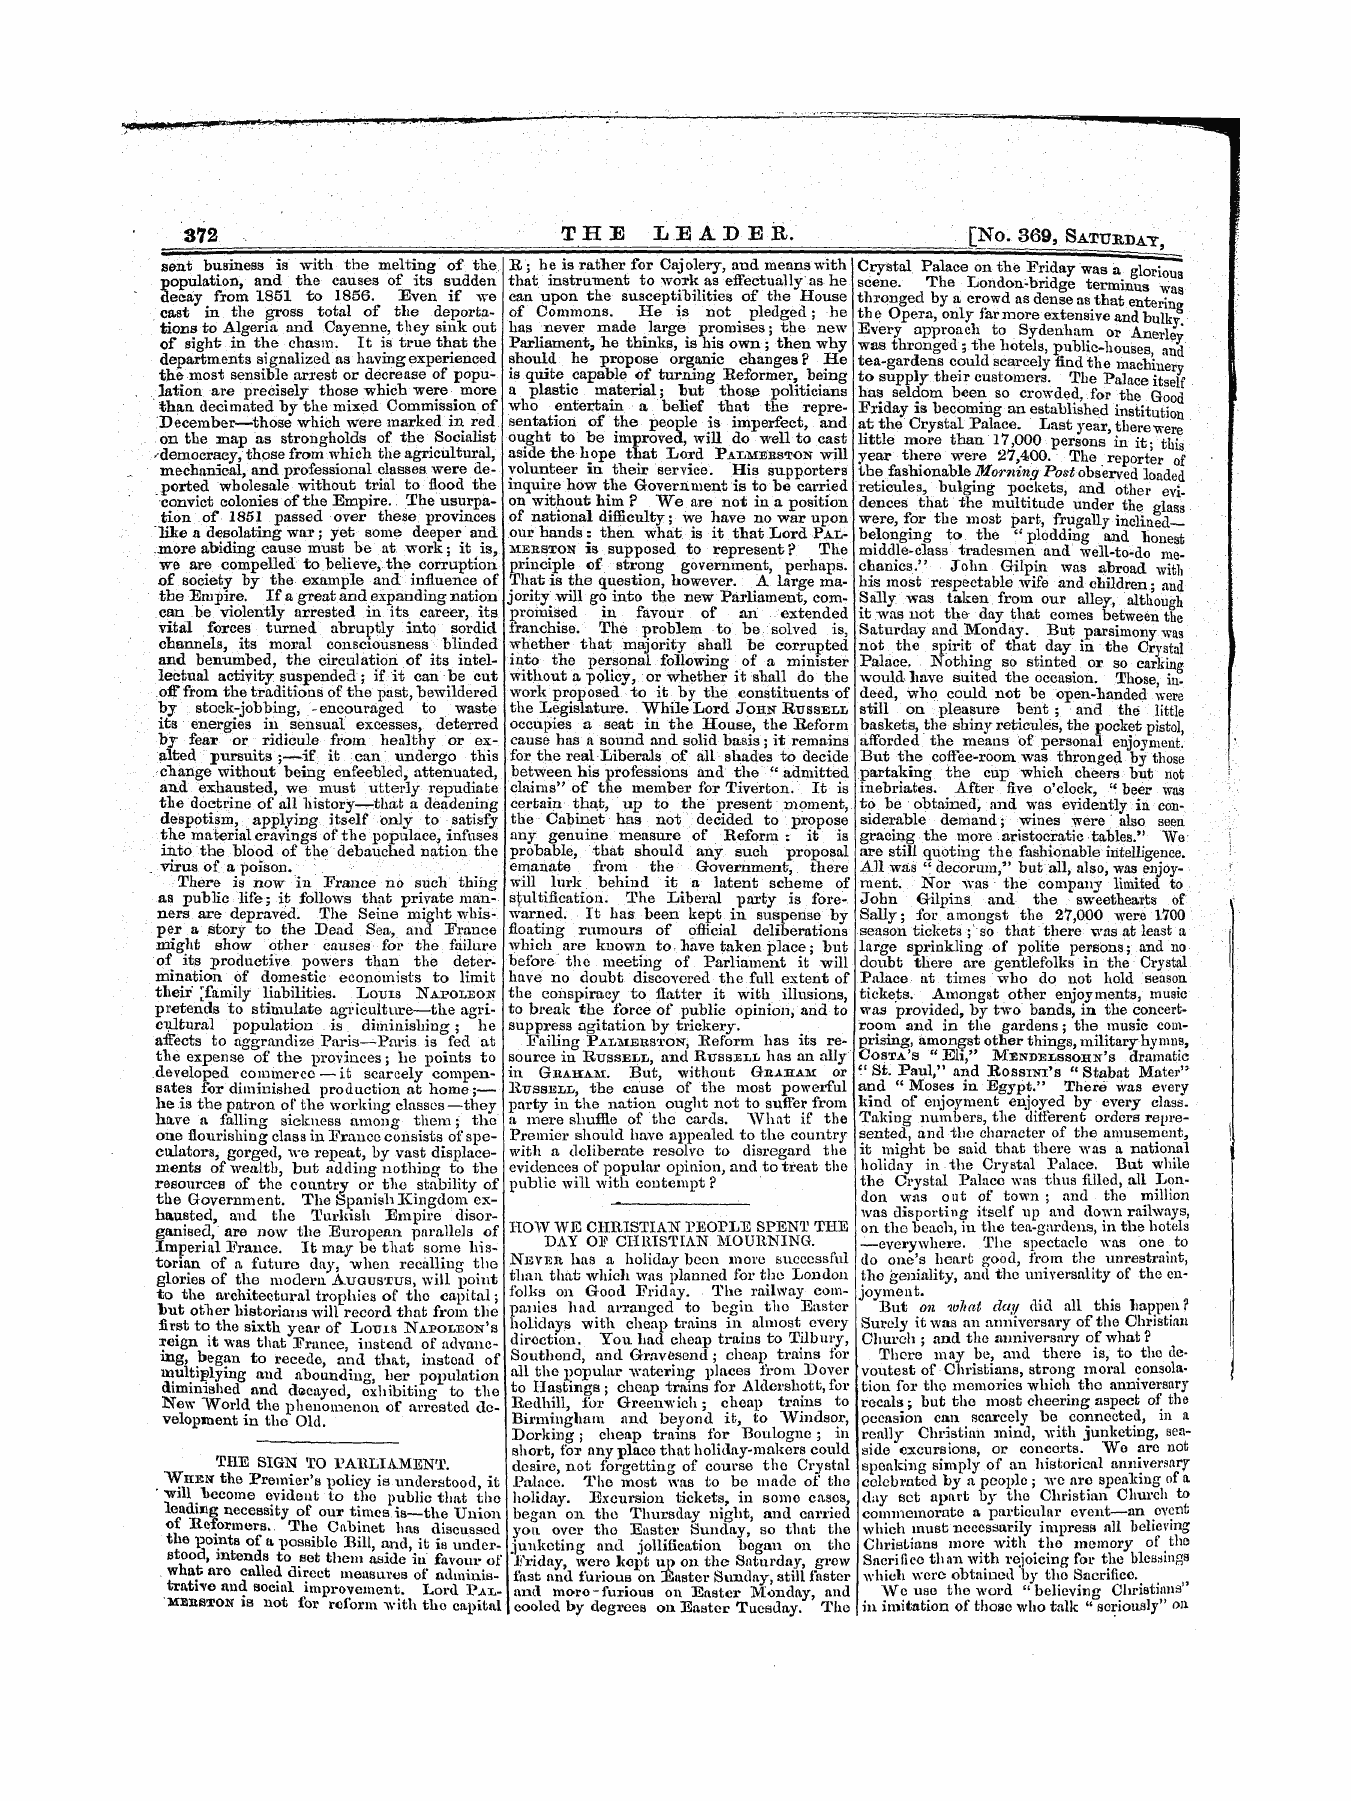 Leader (1850-1860): jS F Y, 1st edition: 12